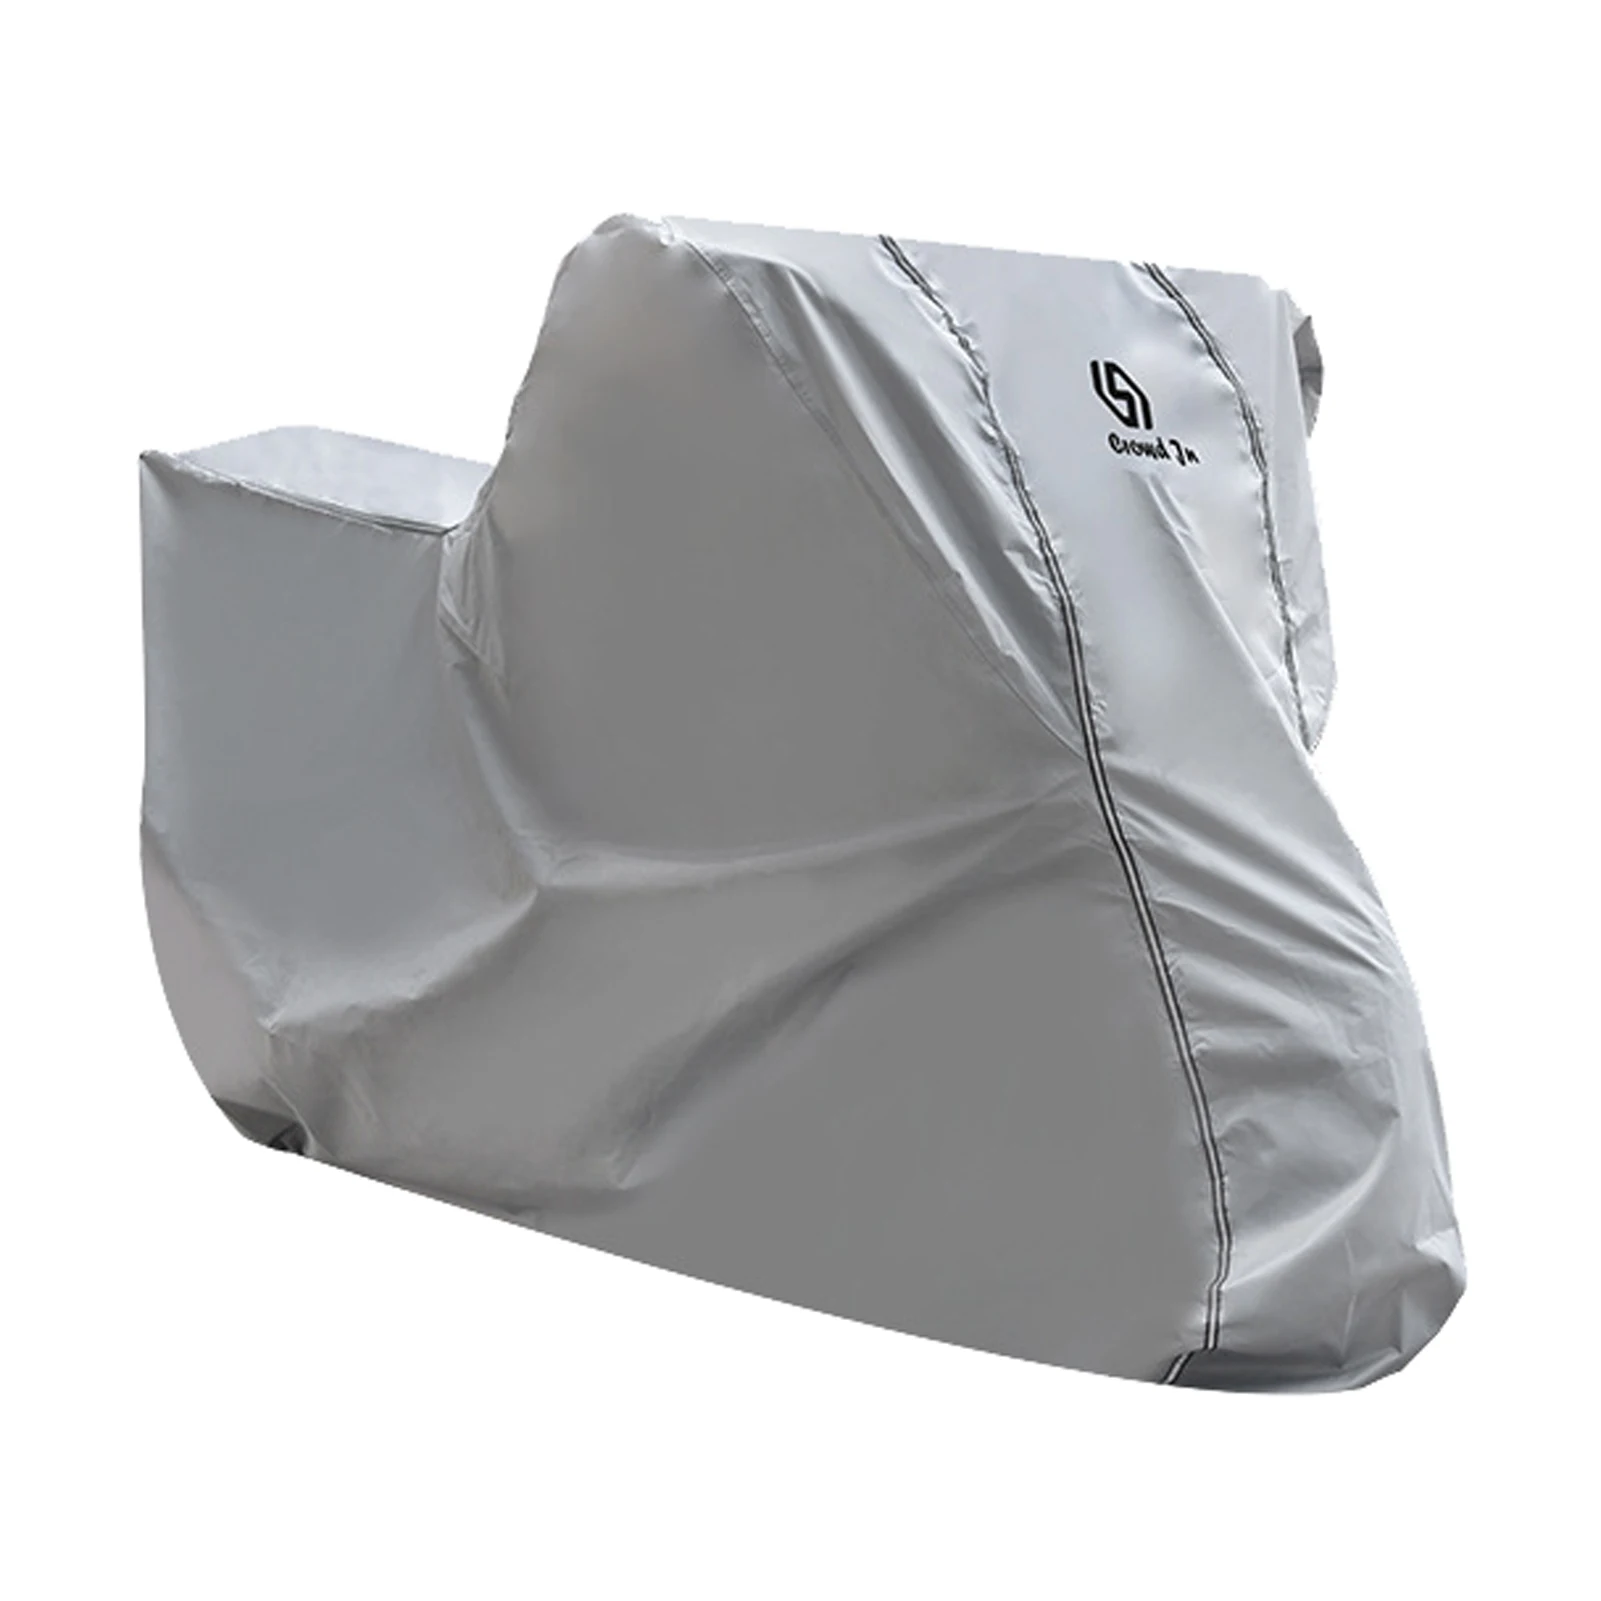 Waterproof Outdoor Universal Tent Garage Motorcycle Cover Foldable Heavy Duty Dustproof Oxford Cloth With Locking Hole Scooter